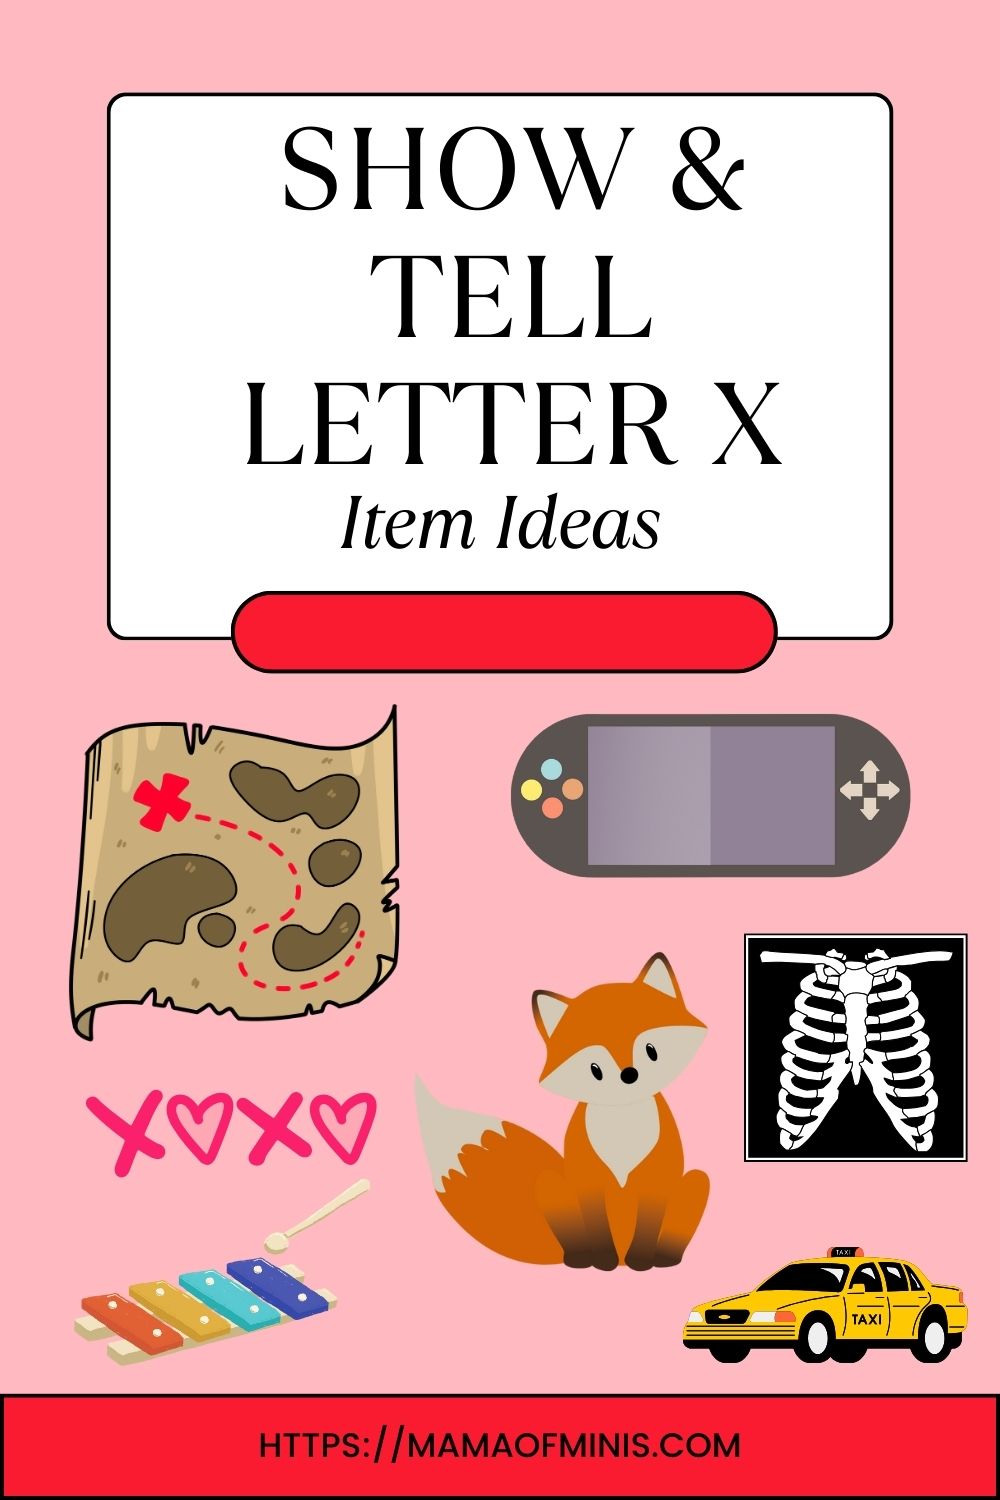 Show and Tell Letter X Item Ideas Pin